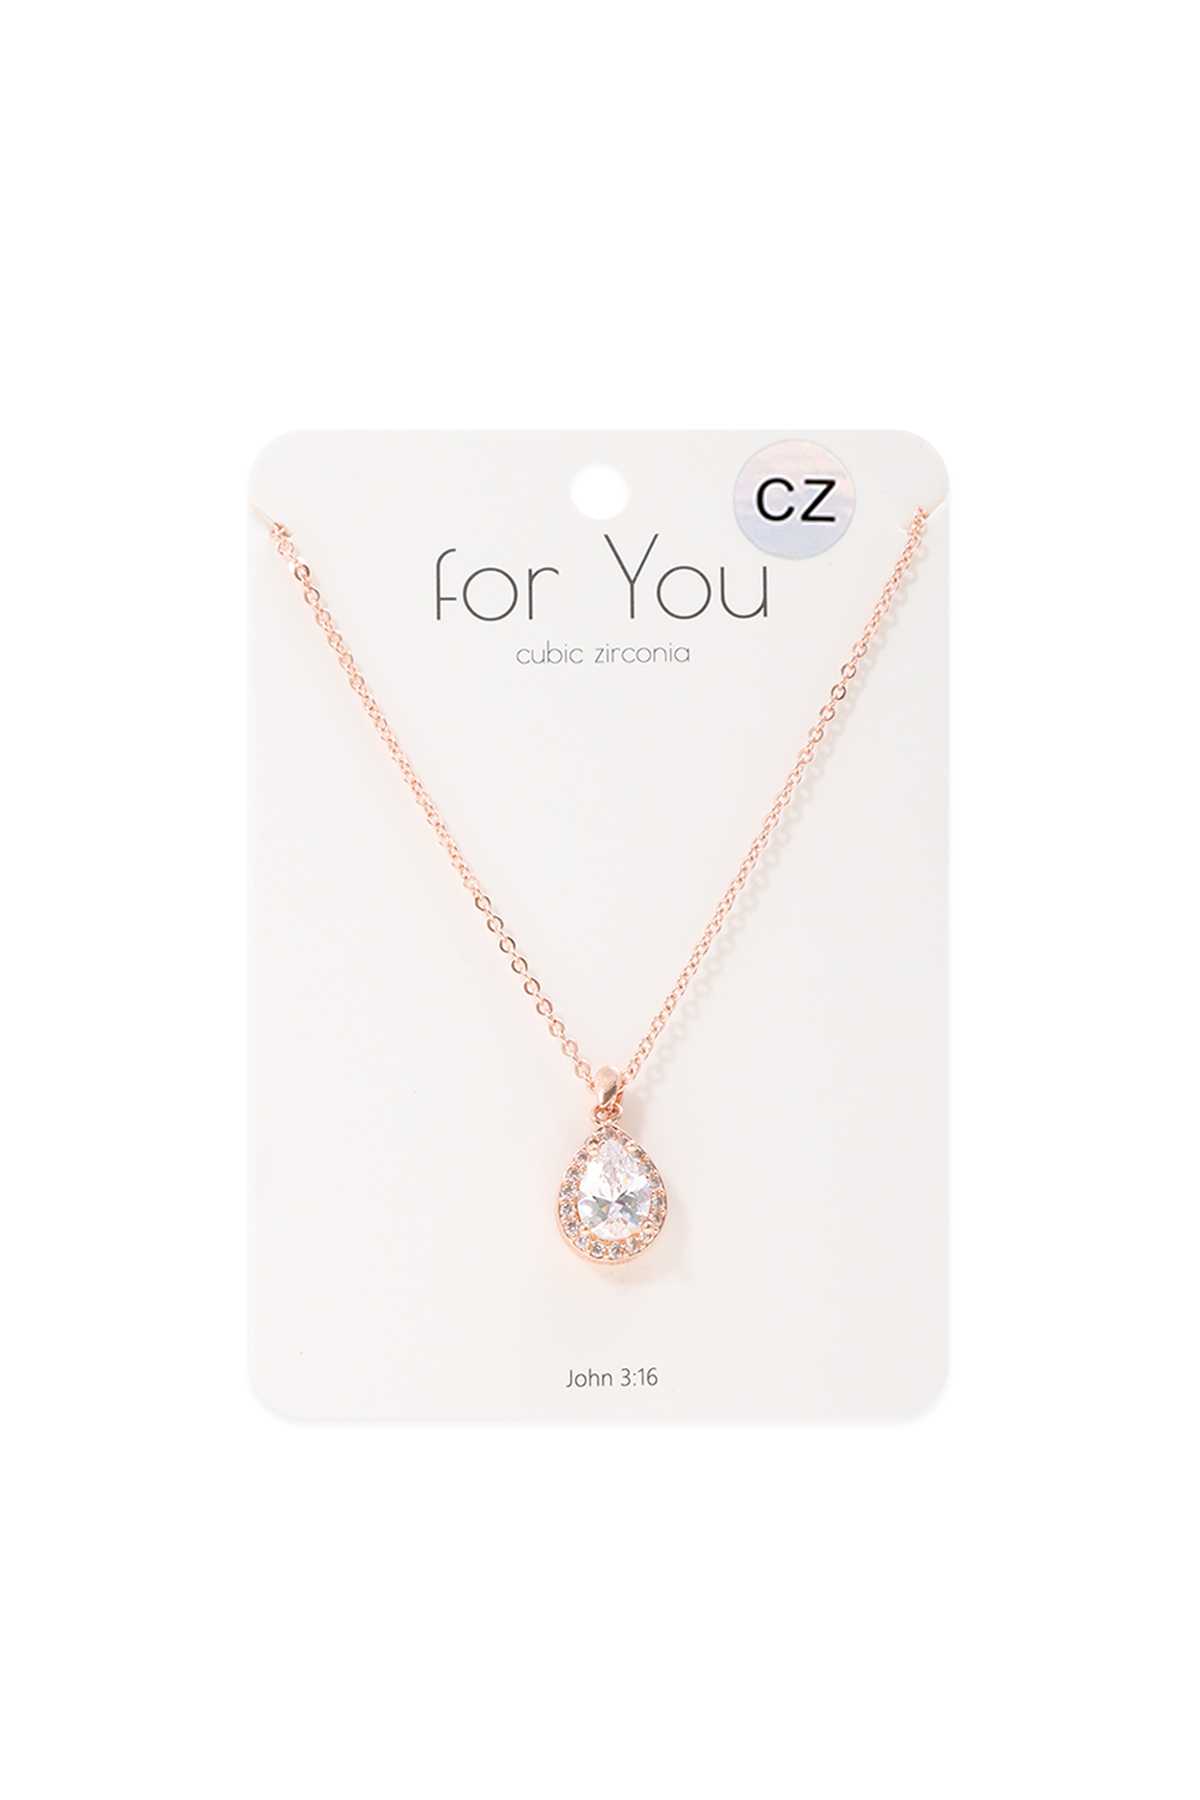 Tear Drop Shaped Crystal Pendant Necklace with Rhinestone Accent